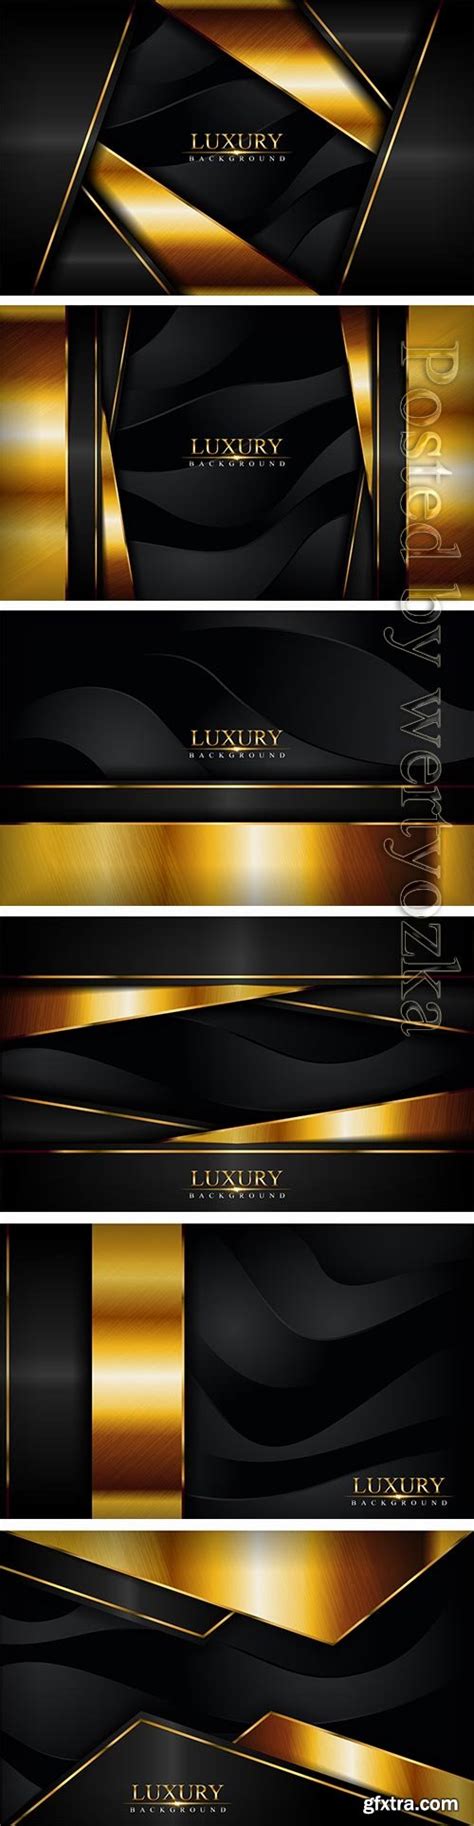 Luxury Black Background With Golden Lines Vector Composition Gfxtra